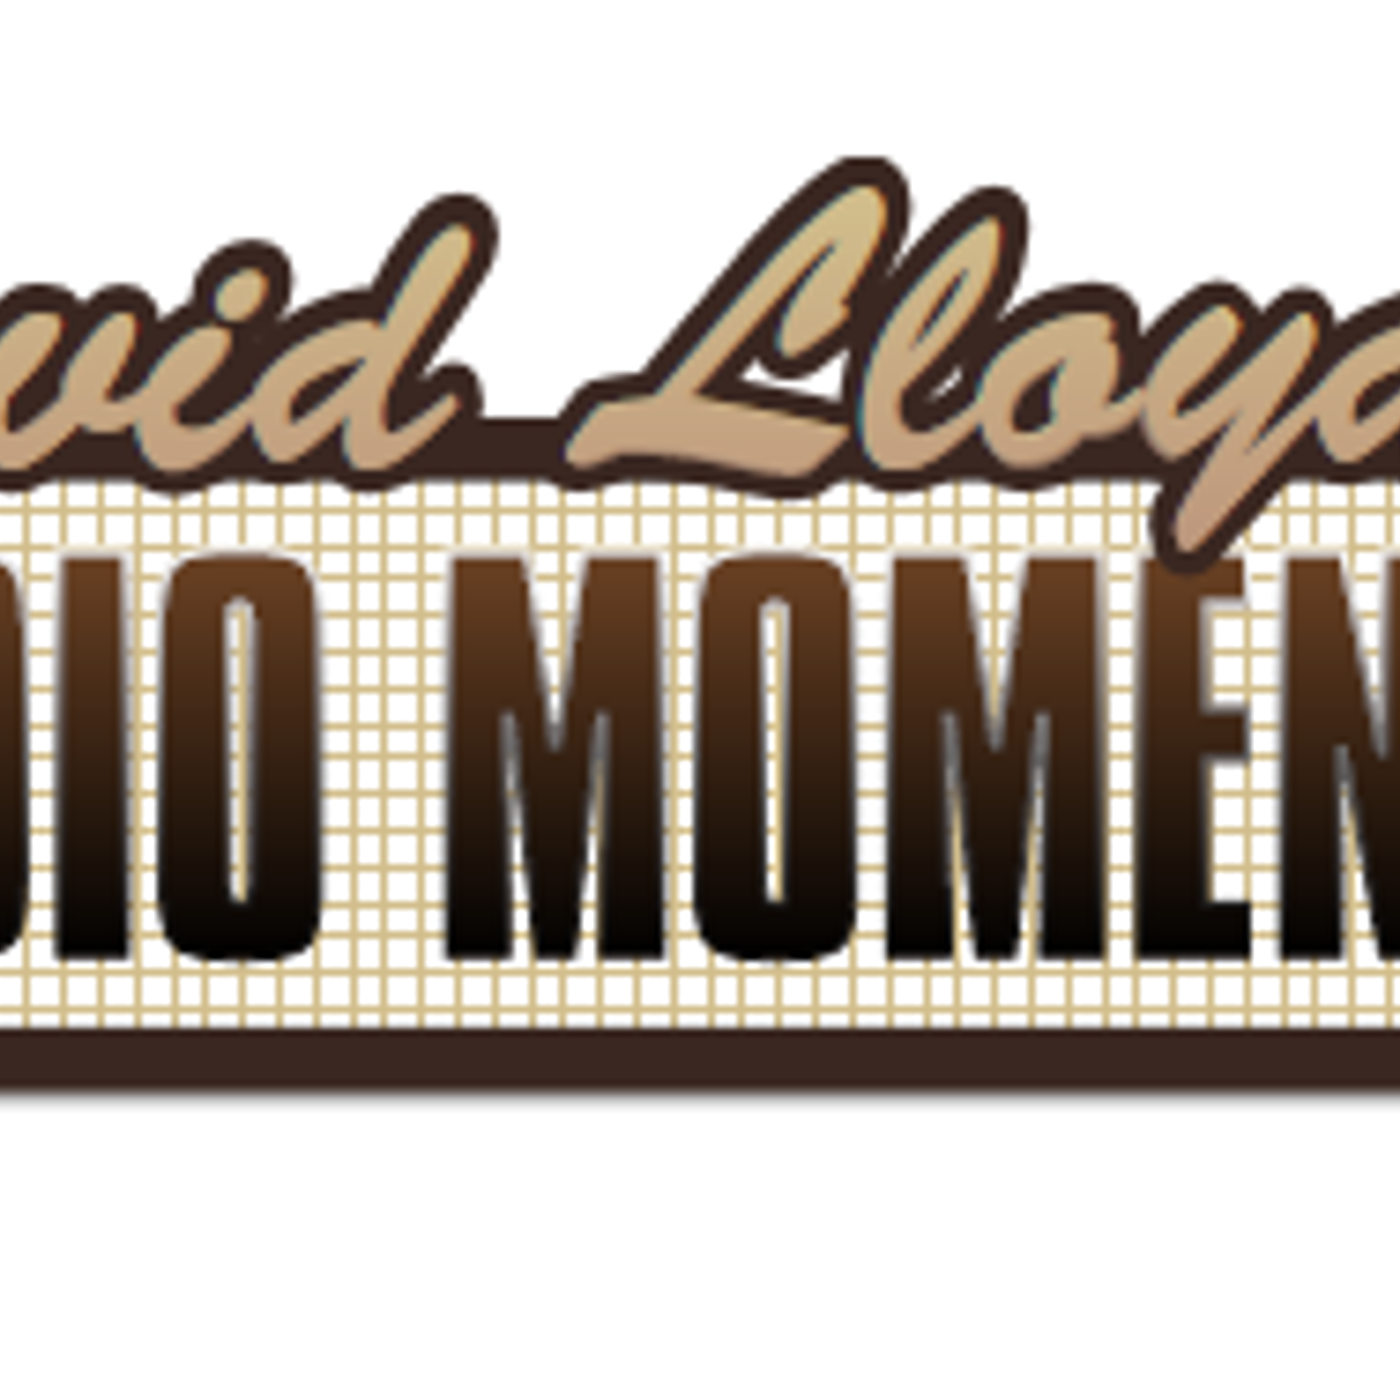 1192: Radiomoment Review 10th June 2016